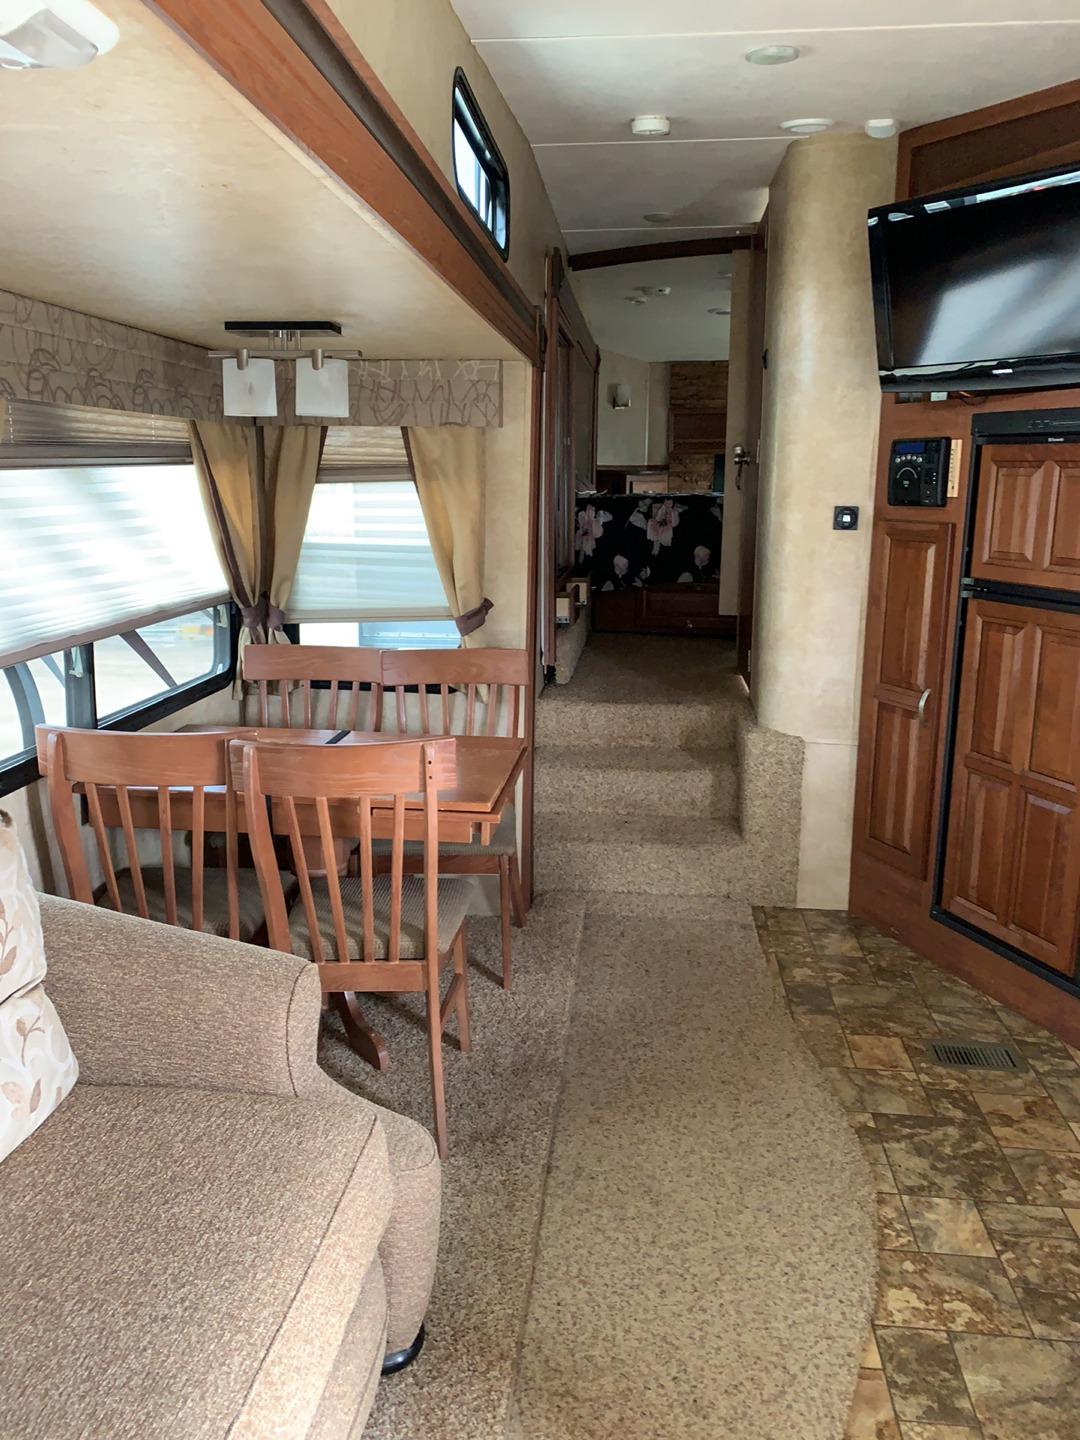 2012 Forest River- Wild Cat Sterling Fifth Wheel 33’ Camper Trailer with Two Slide Outs